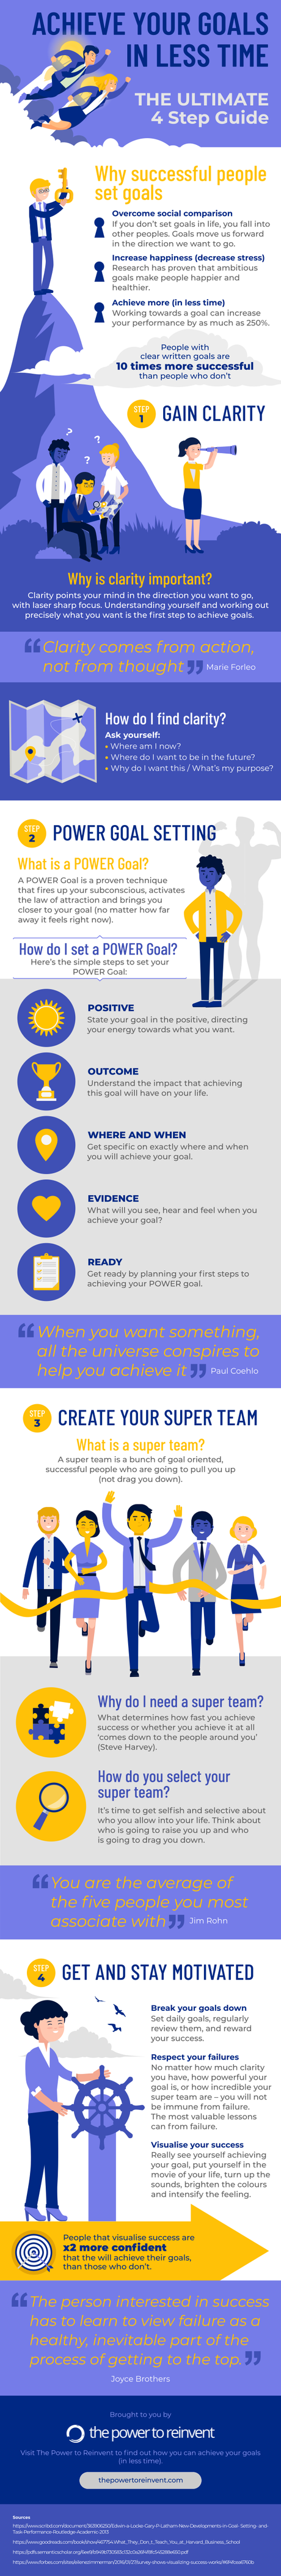 Ultimate Guide to Goal Setting - 4 Steps